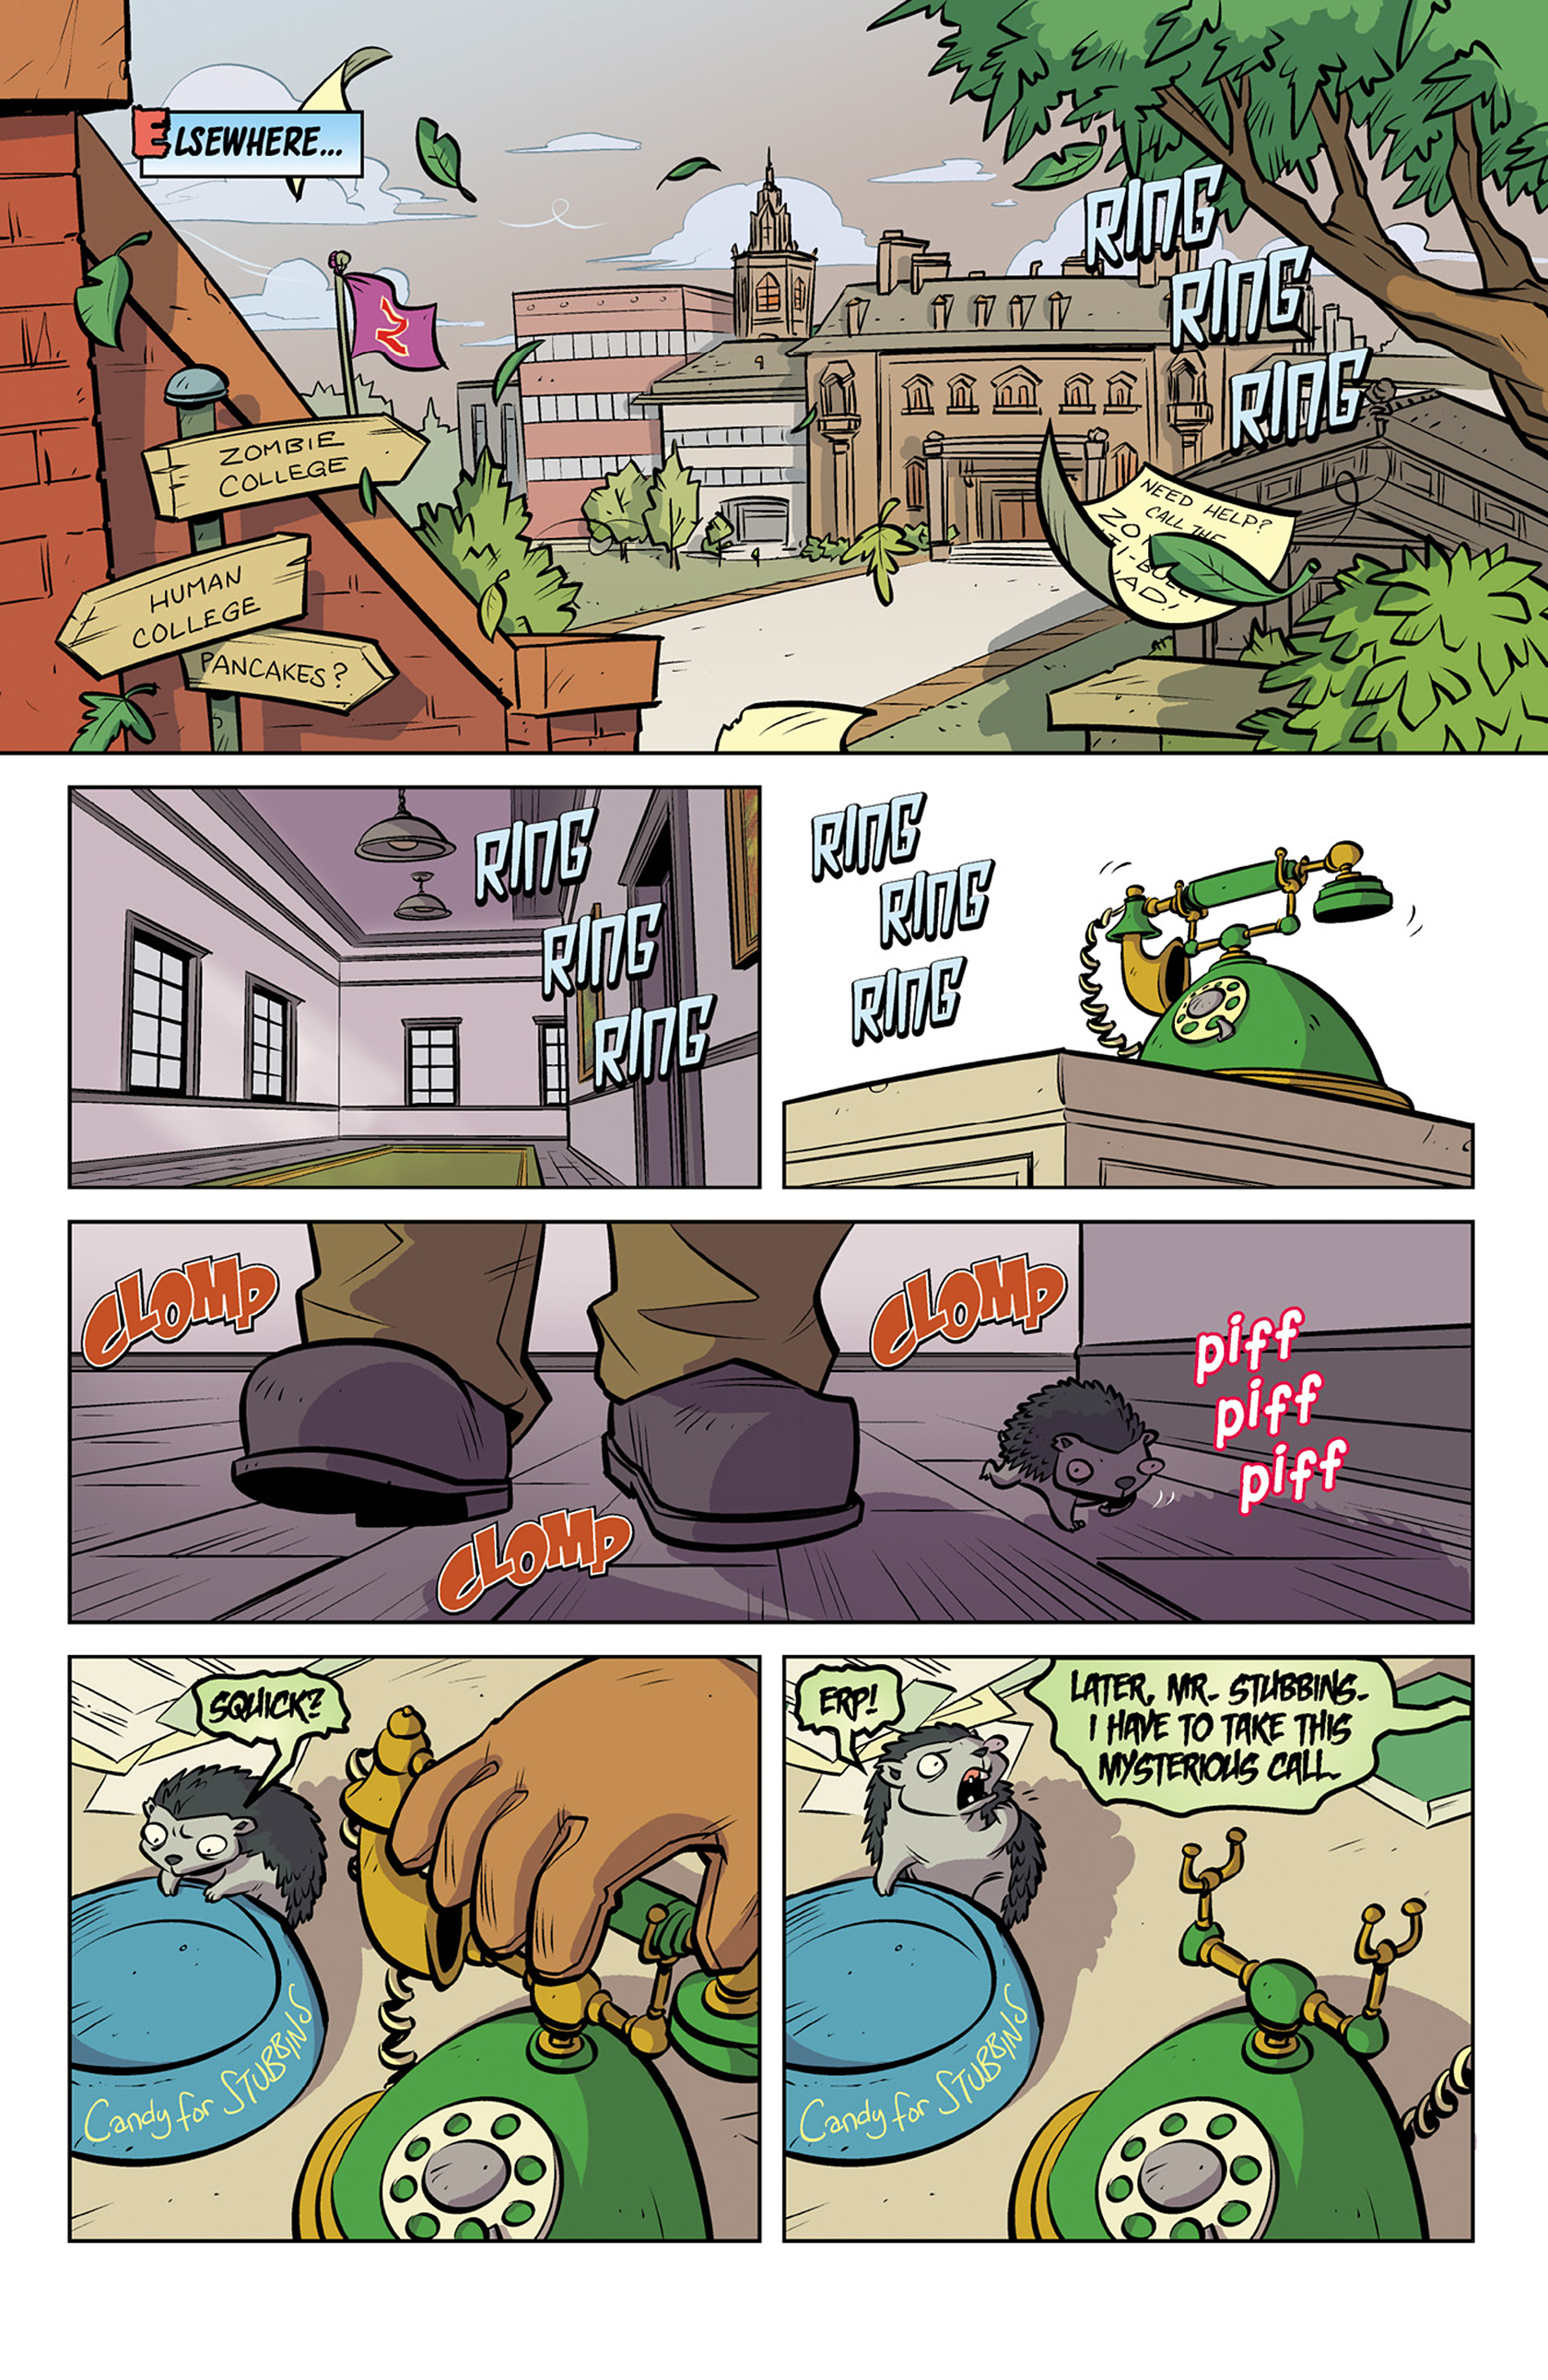 Plants Vs Zombies Bully For You Issue 1  Read Plants Vs Zombies Bully For  You Issue 1 comic online in high quality. Read Full Comic online for free -  Read comics